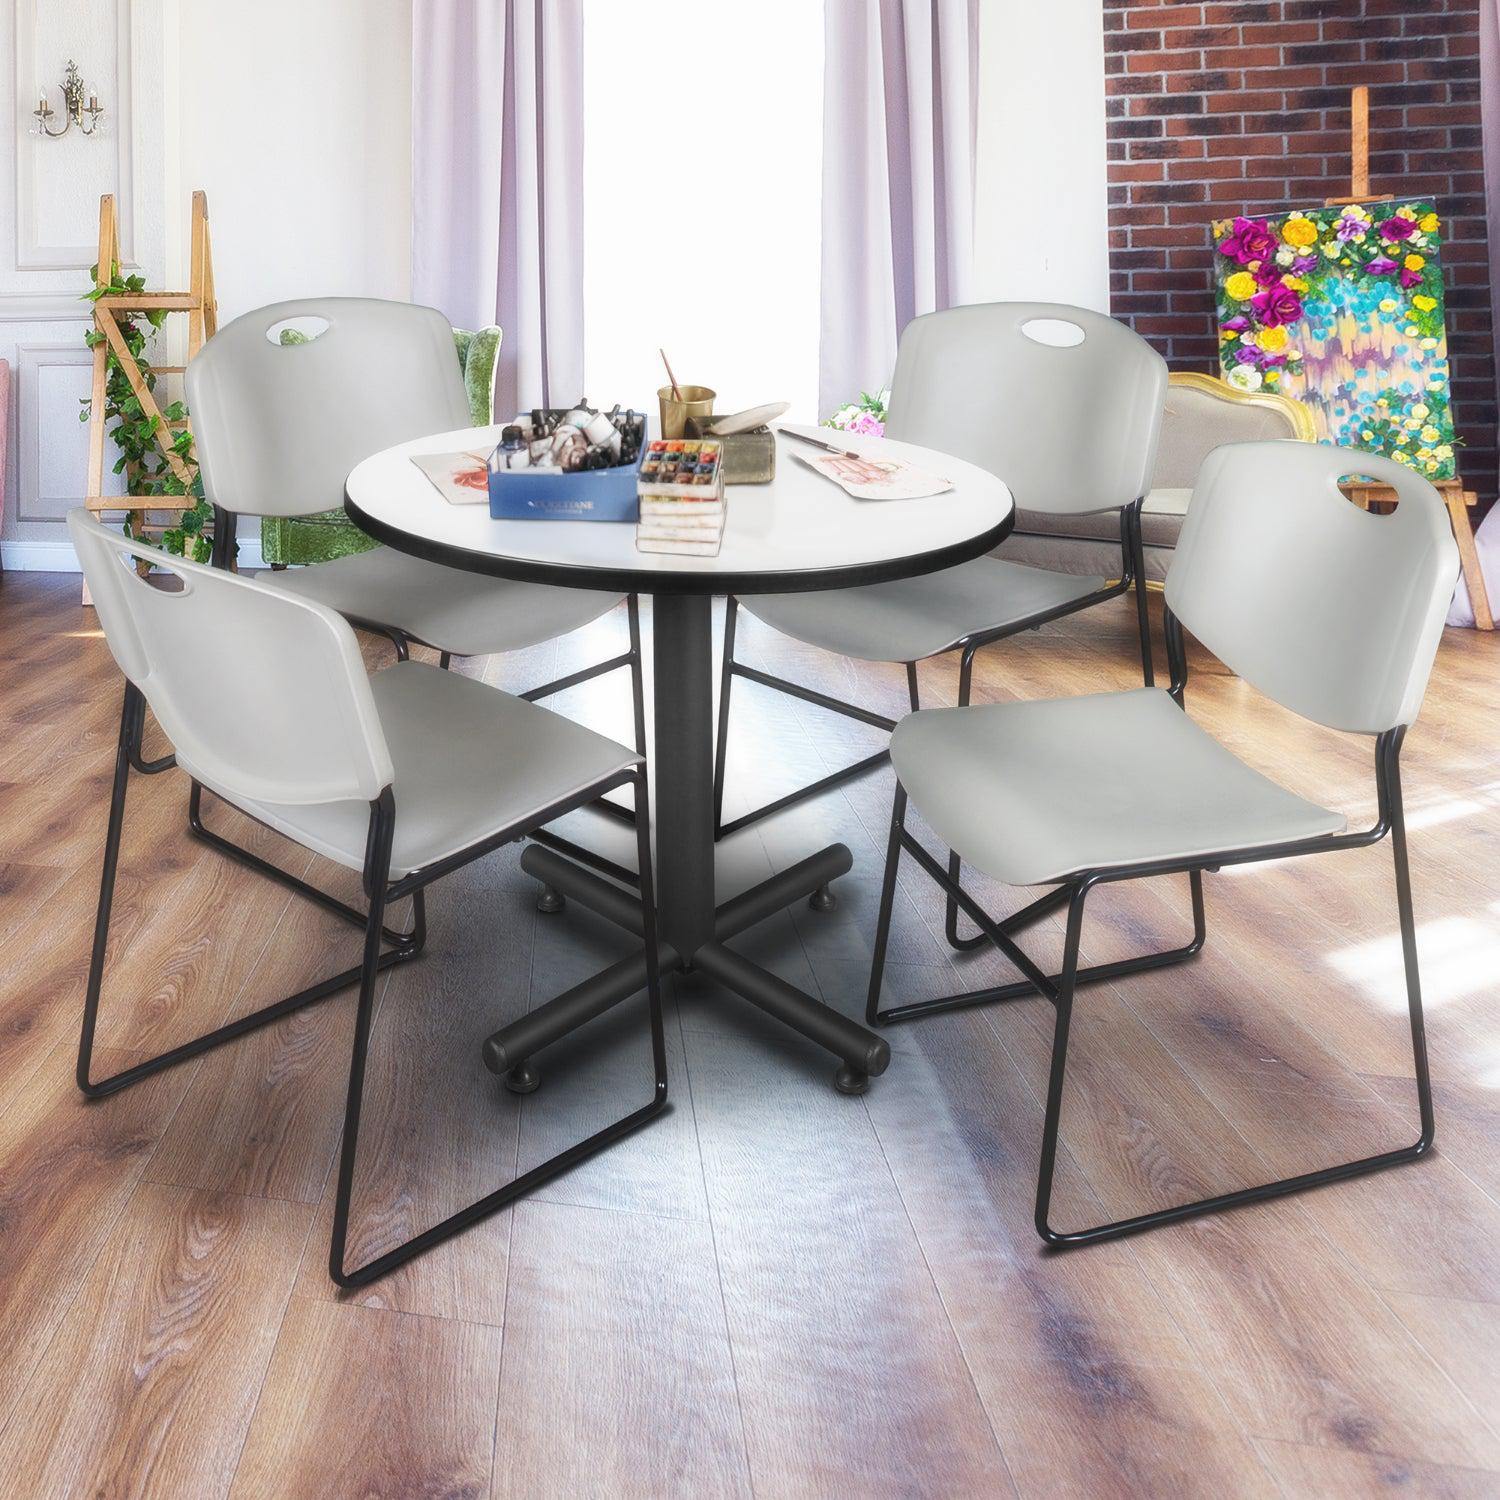 Kobe Round Breakroom Table and Chair Package, Kobe 42" Round X-Base Breakroom Table with 4 Zeng Stack Chairs